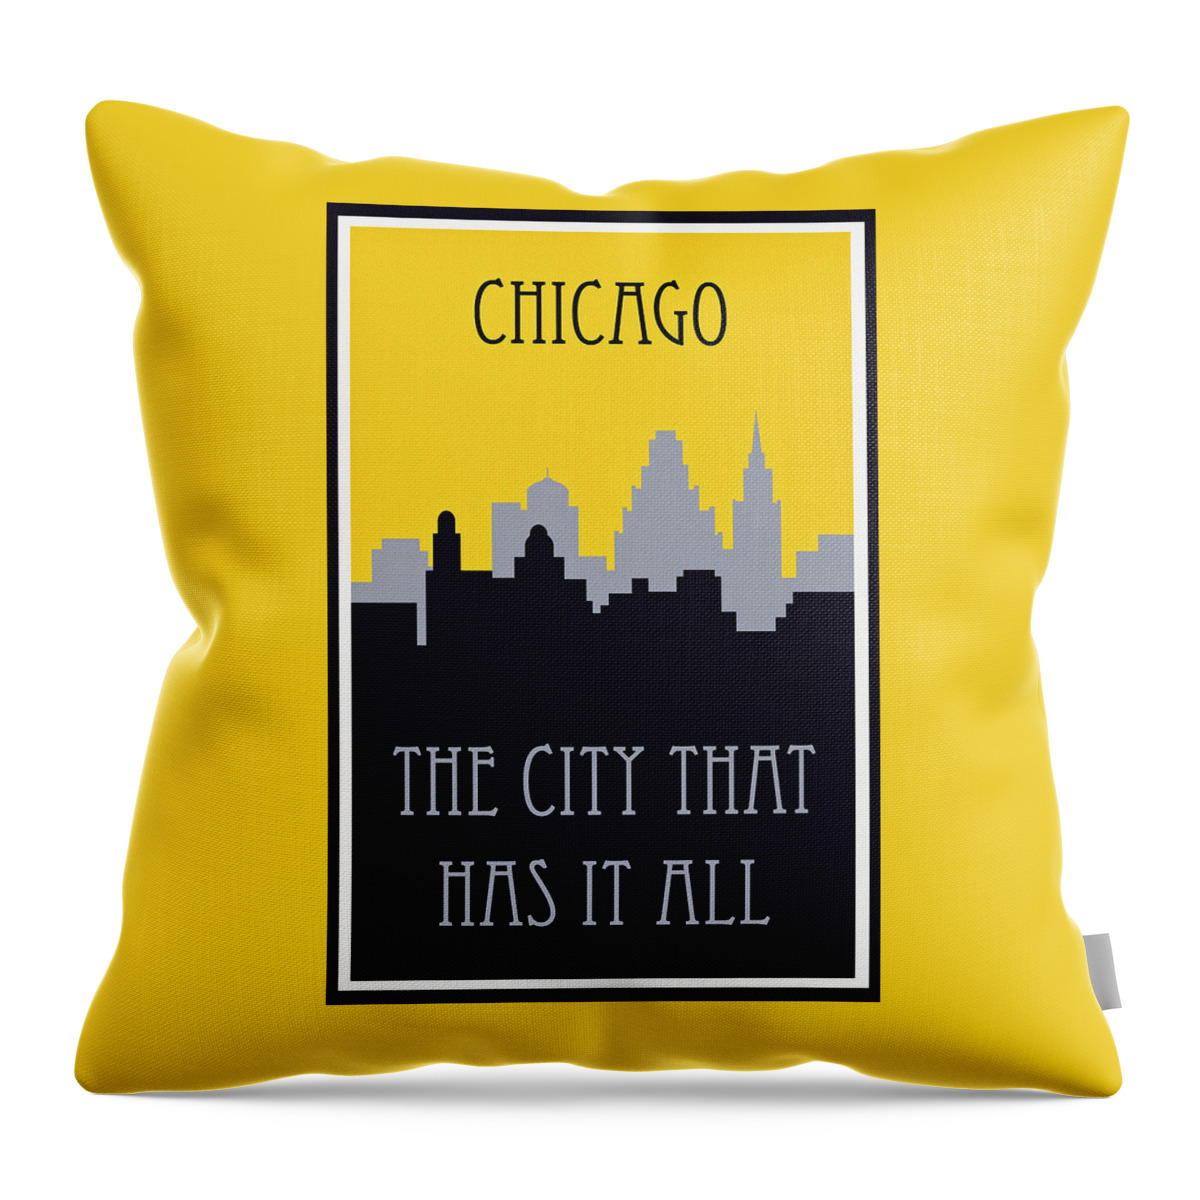 Chicago Throw Pillow featuring the photograph Vintage Travel Chicago Skyline by Carol Japp